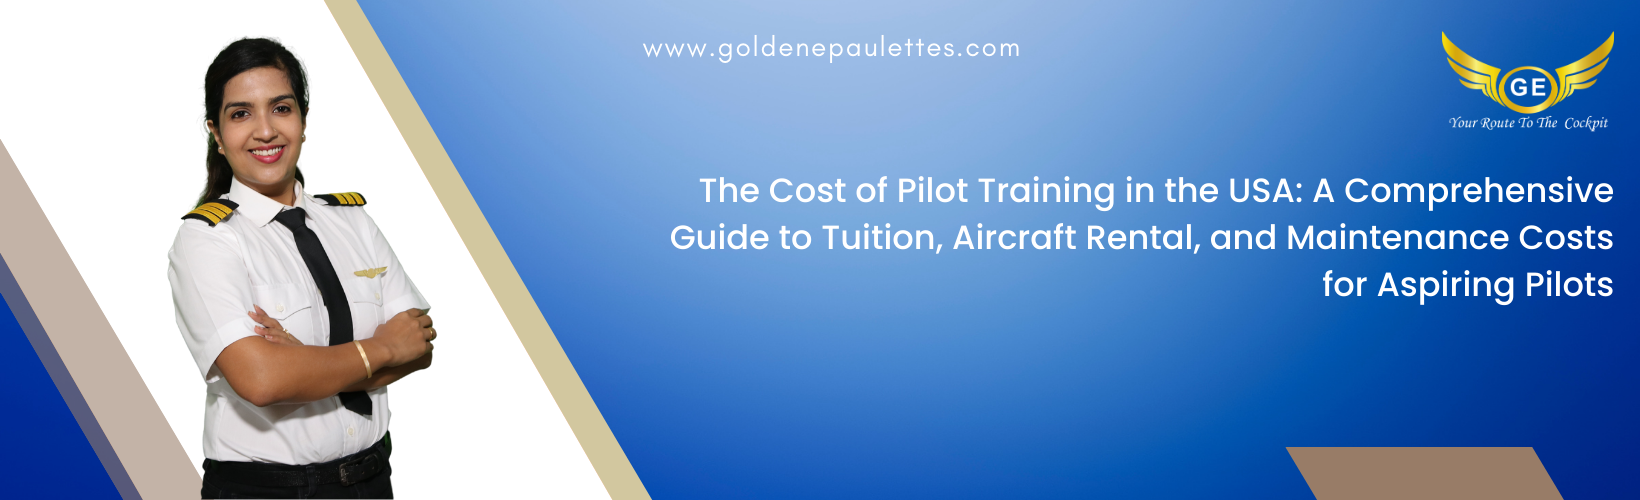 The Cost of Pilot Training in the USA